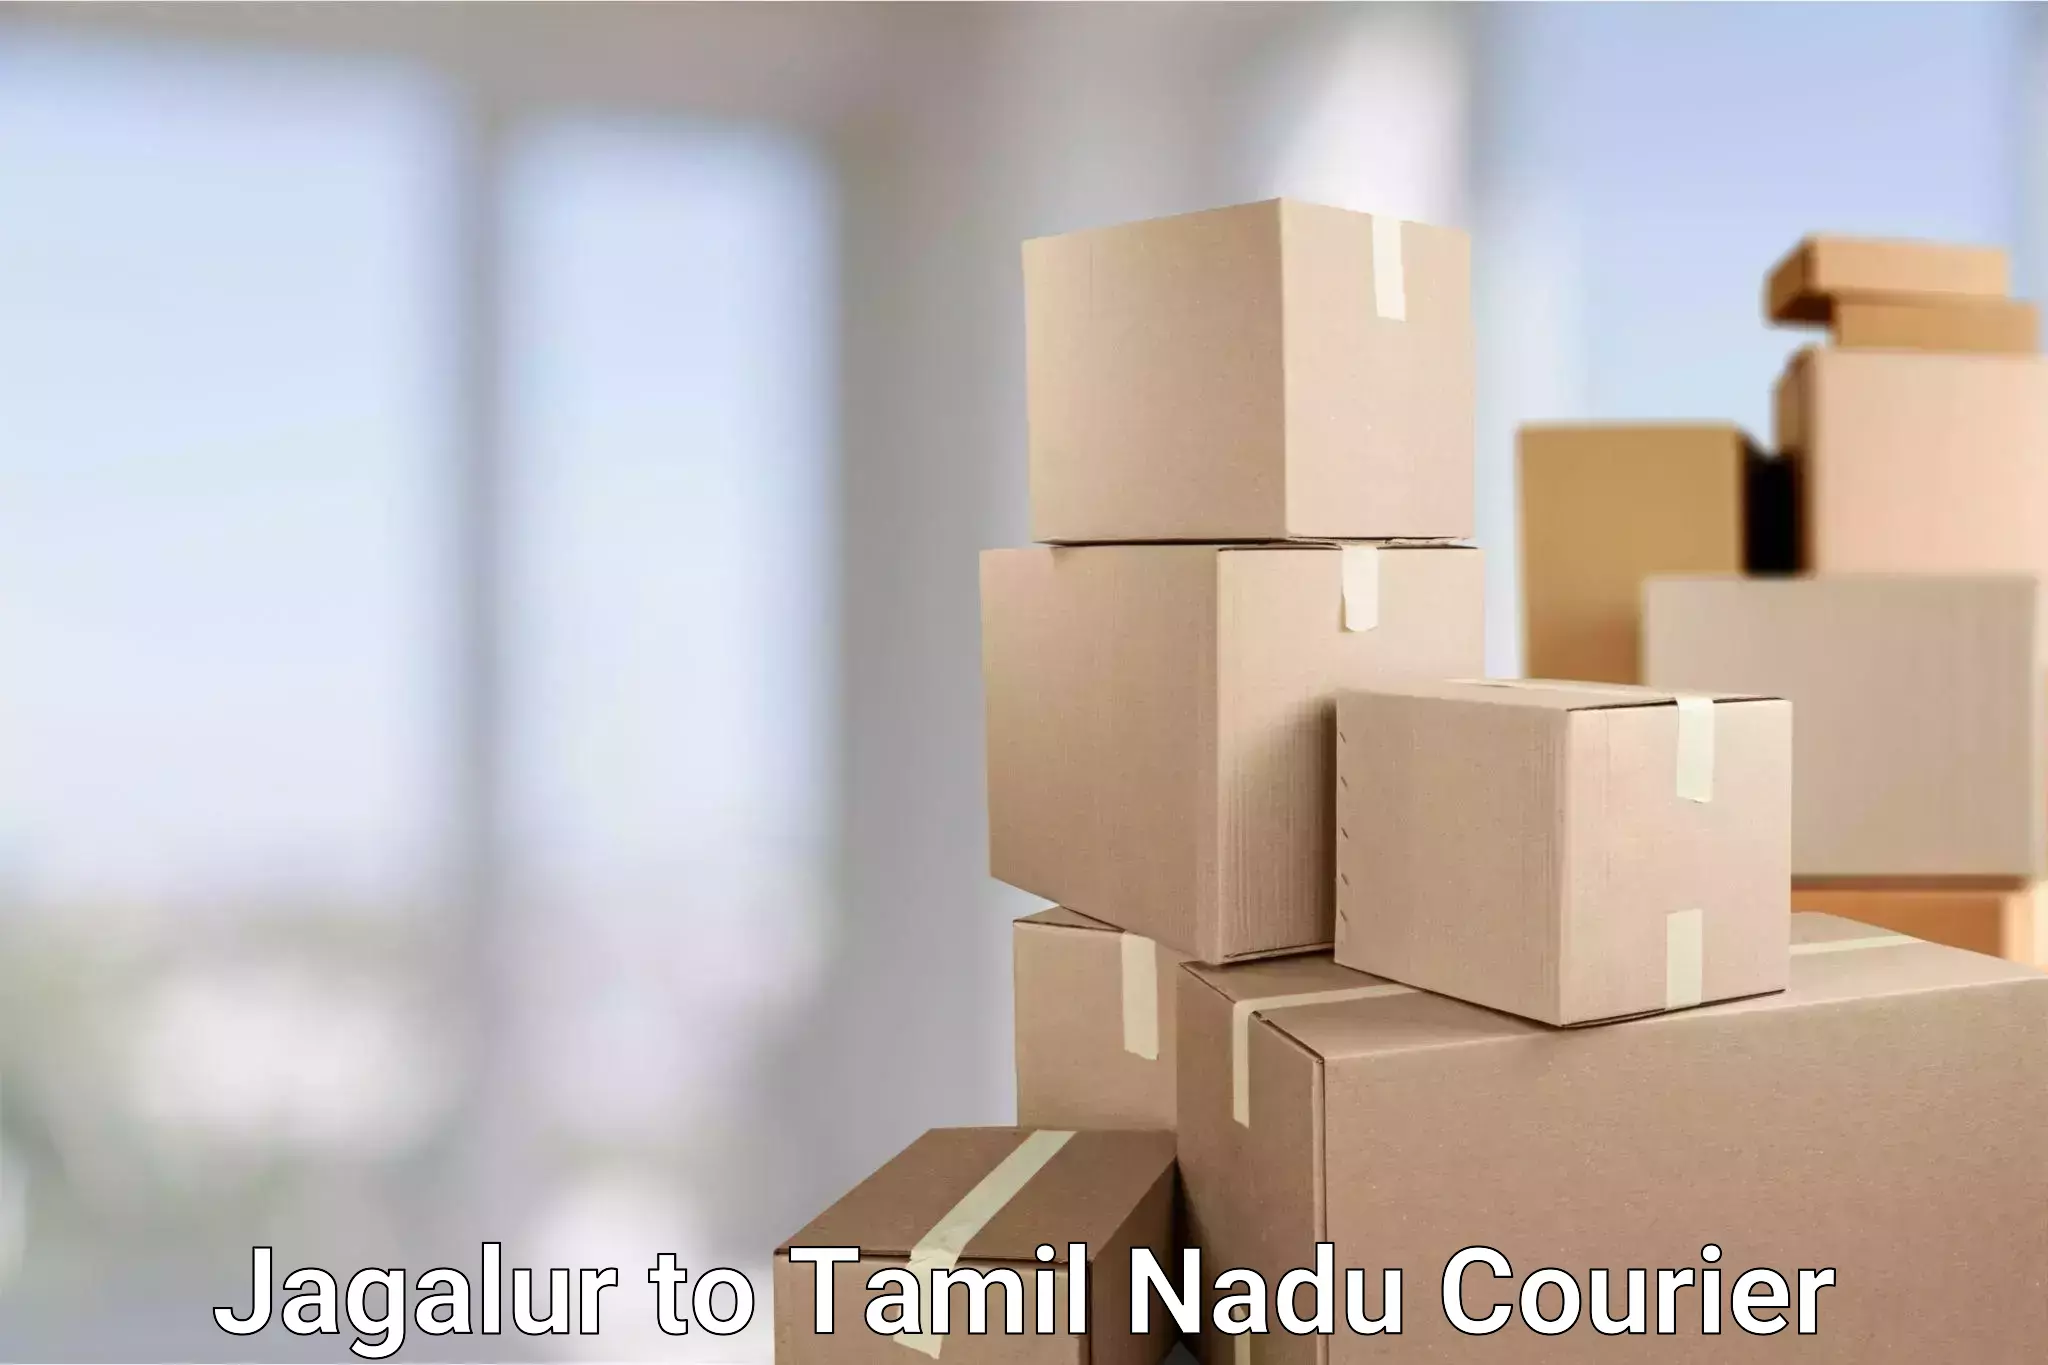 Domestic courier Jagalur to Anna University Chennai